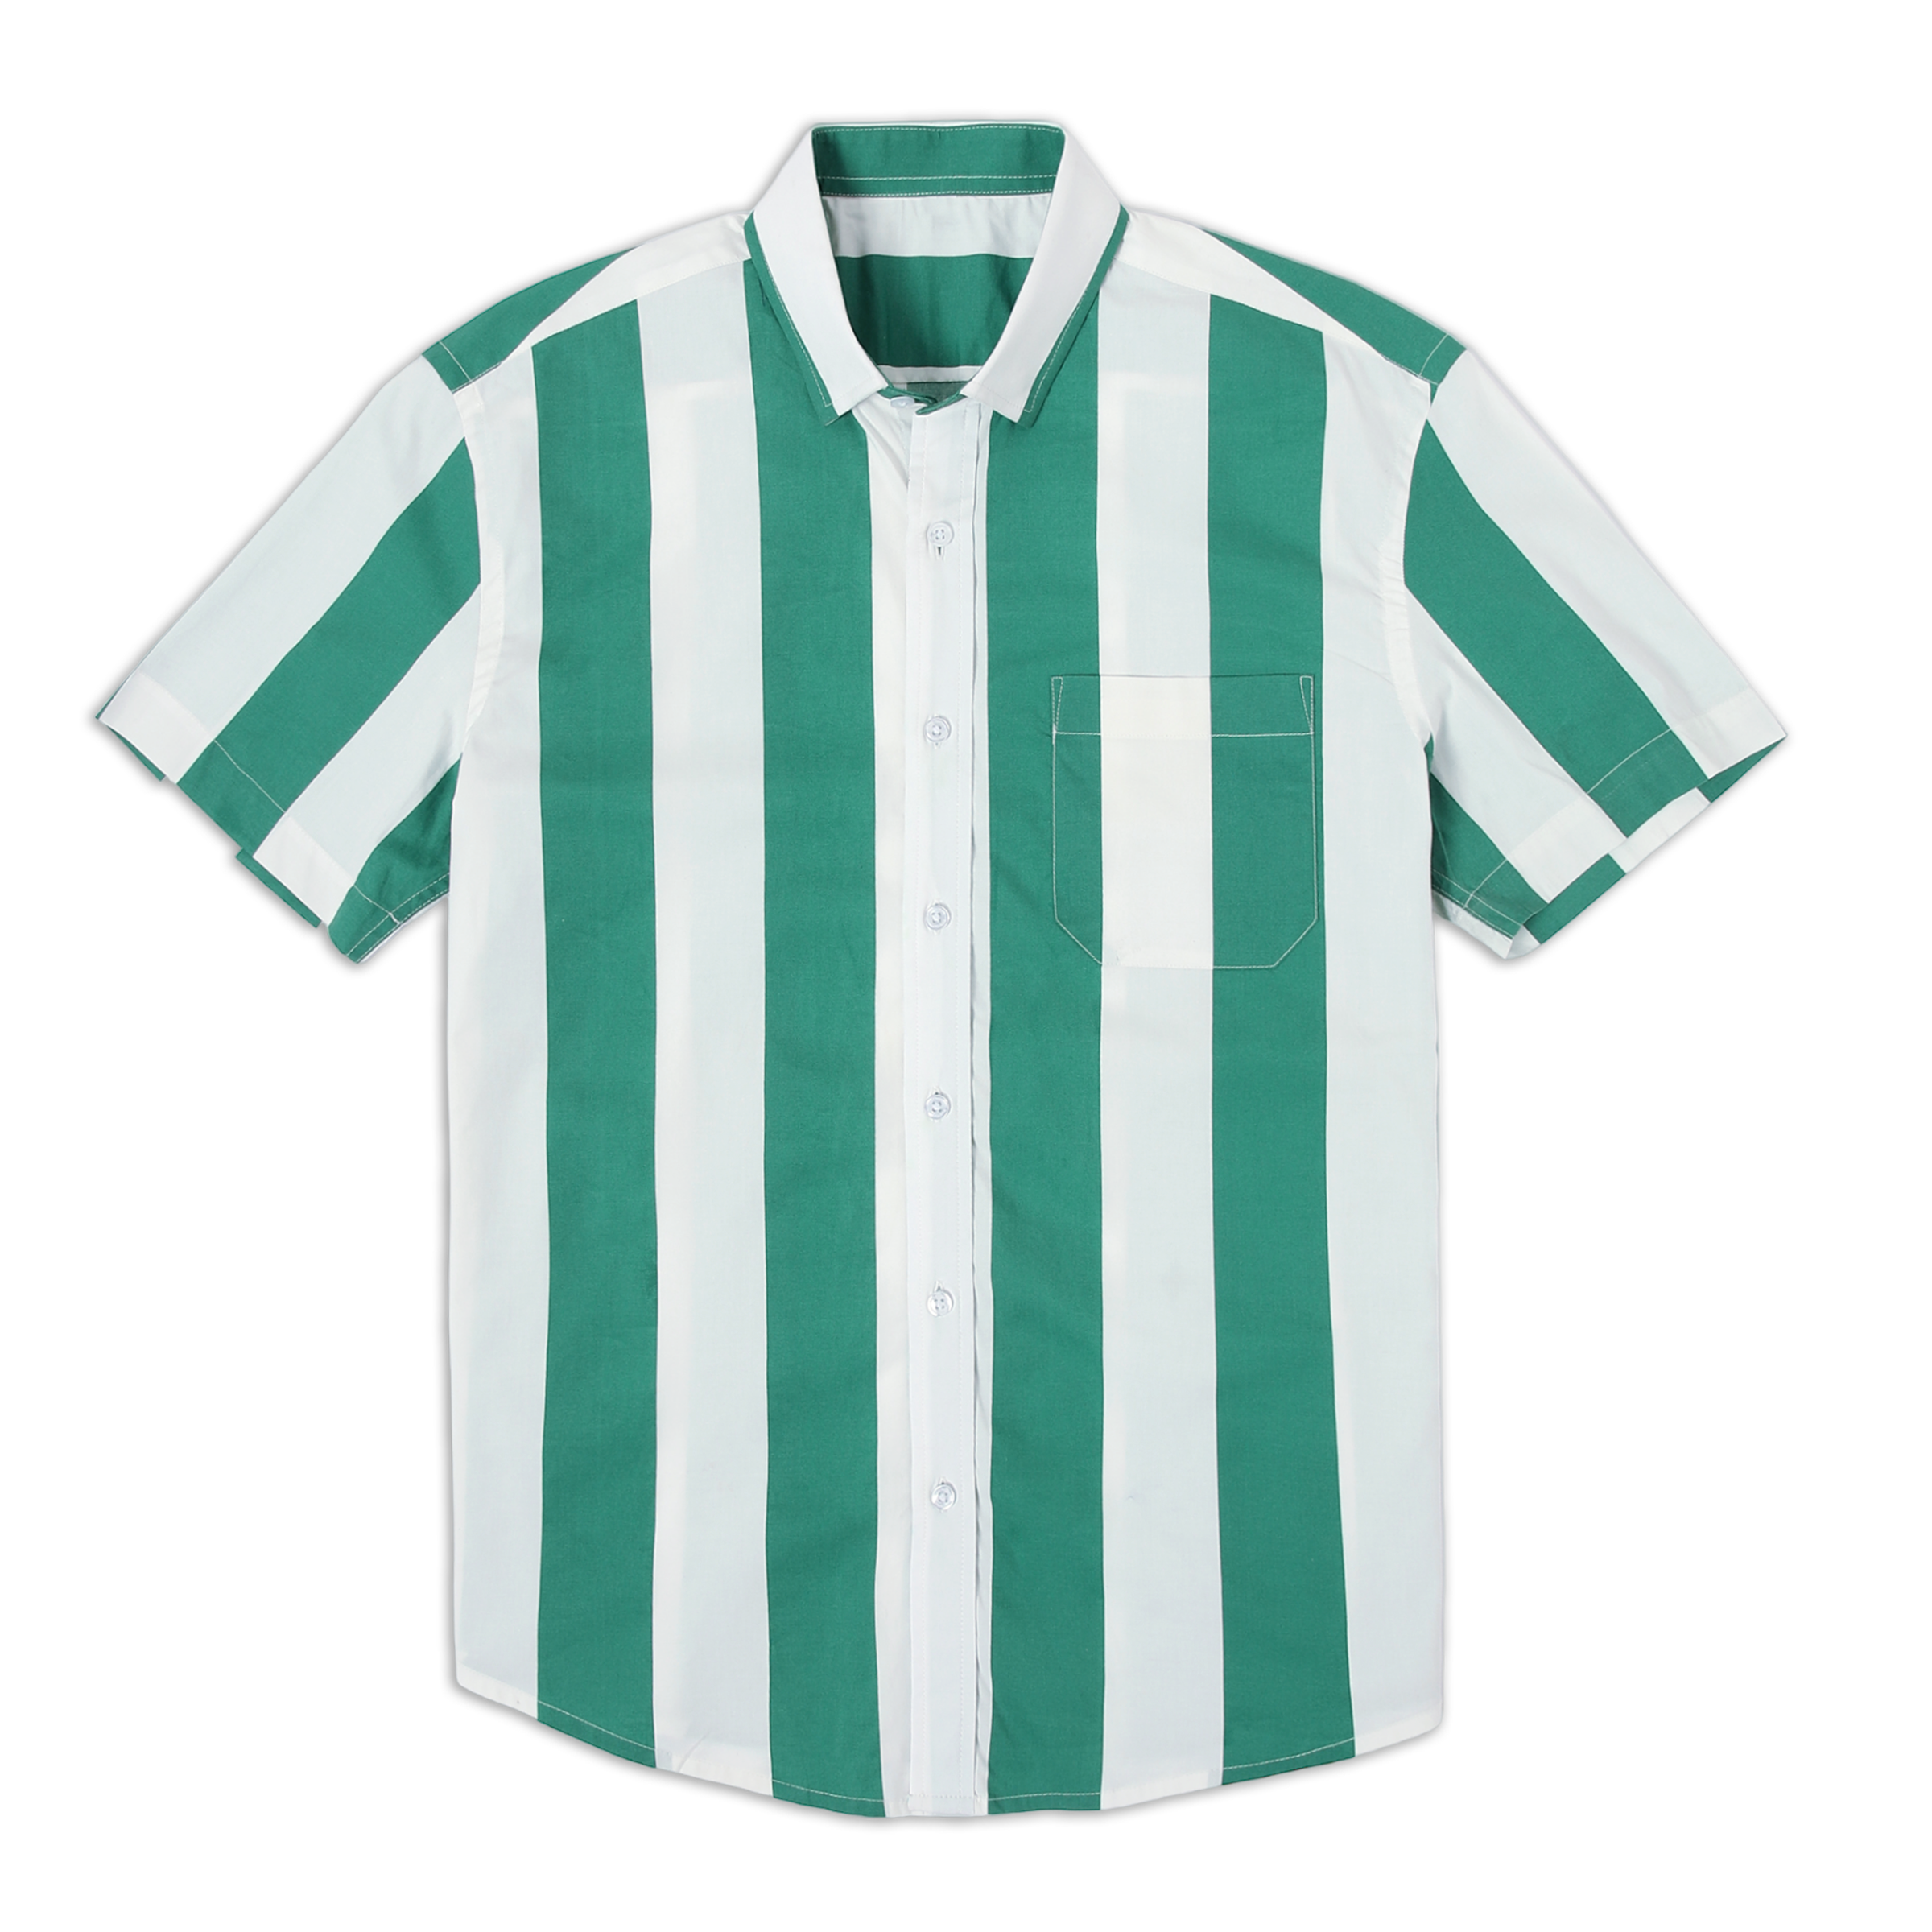 Marina Shirt Green Stripe front with white buttons, button collar, short sleeves and front left patch pocket